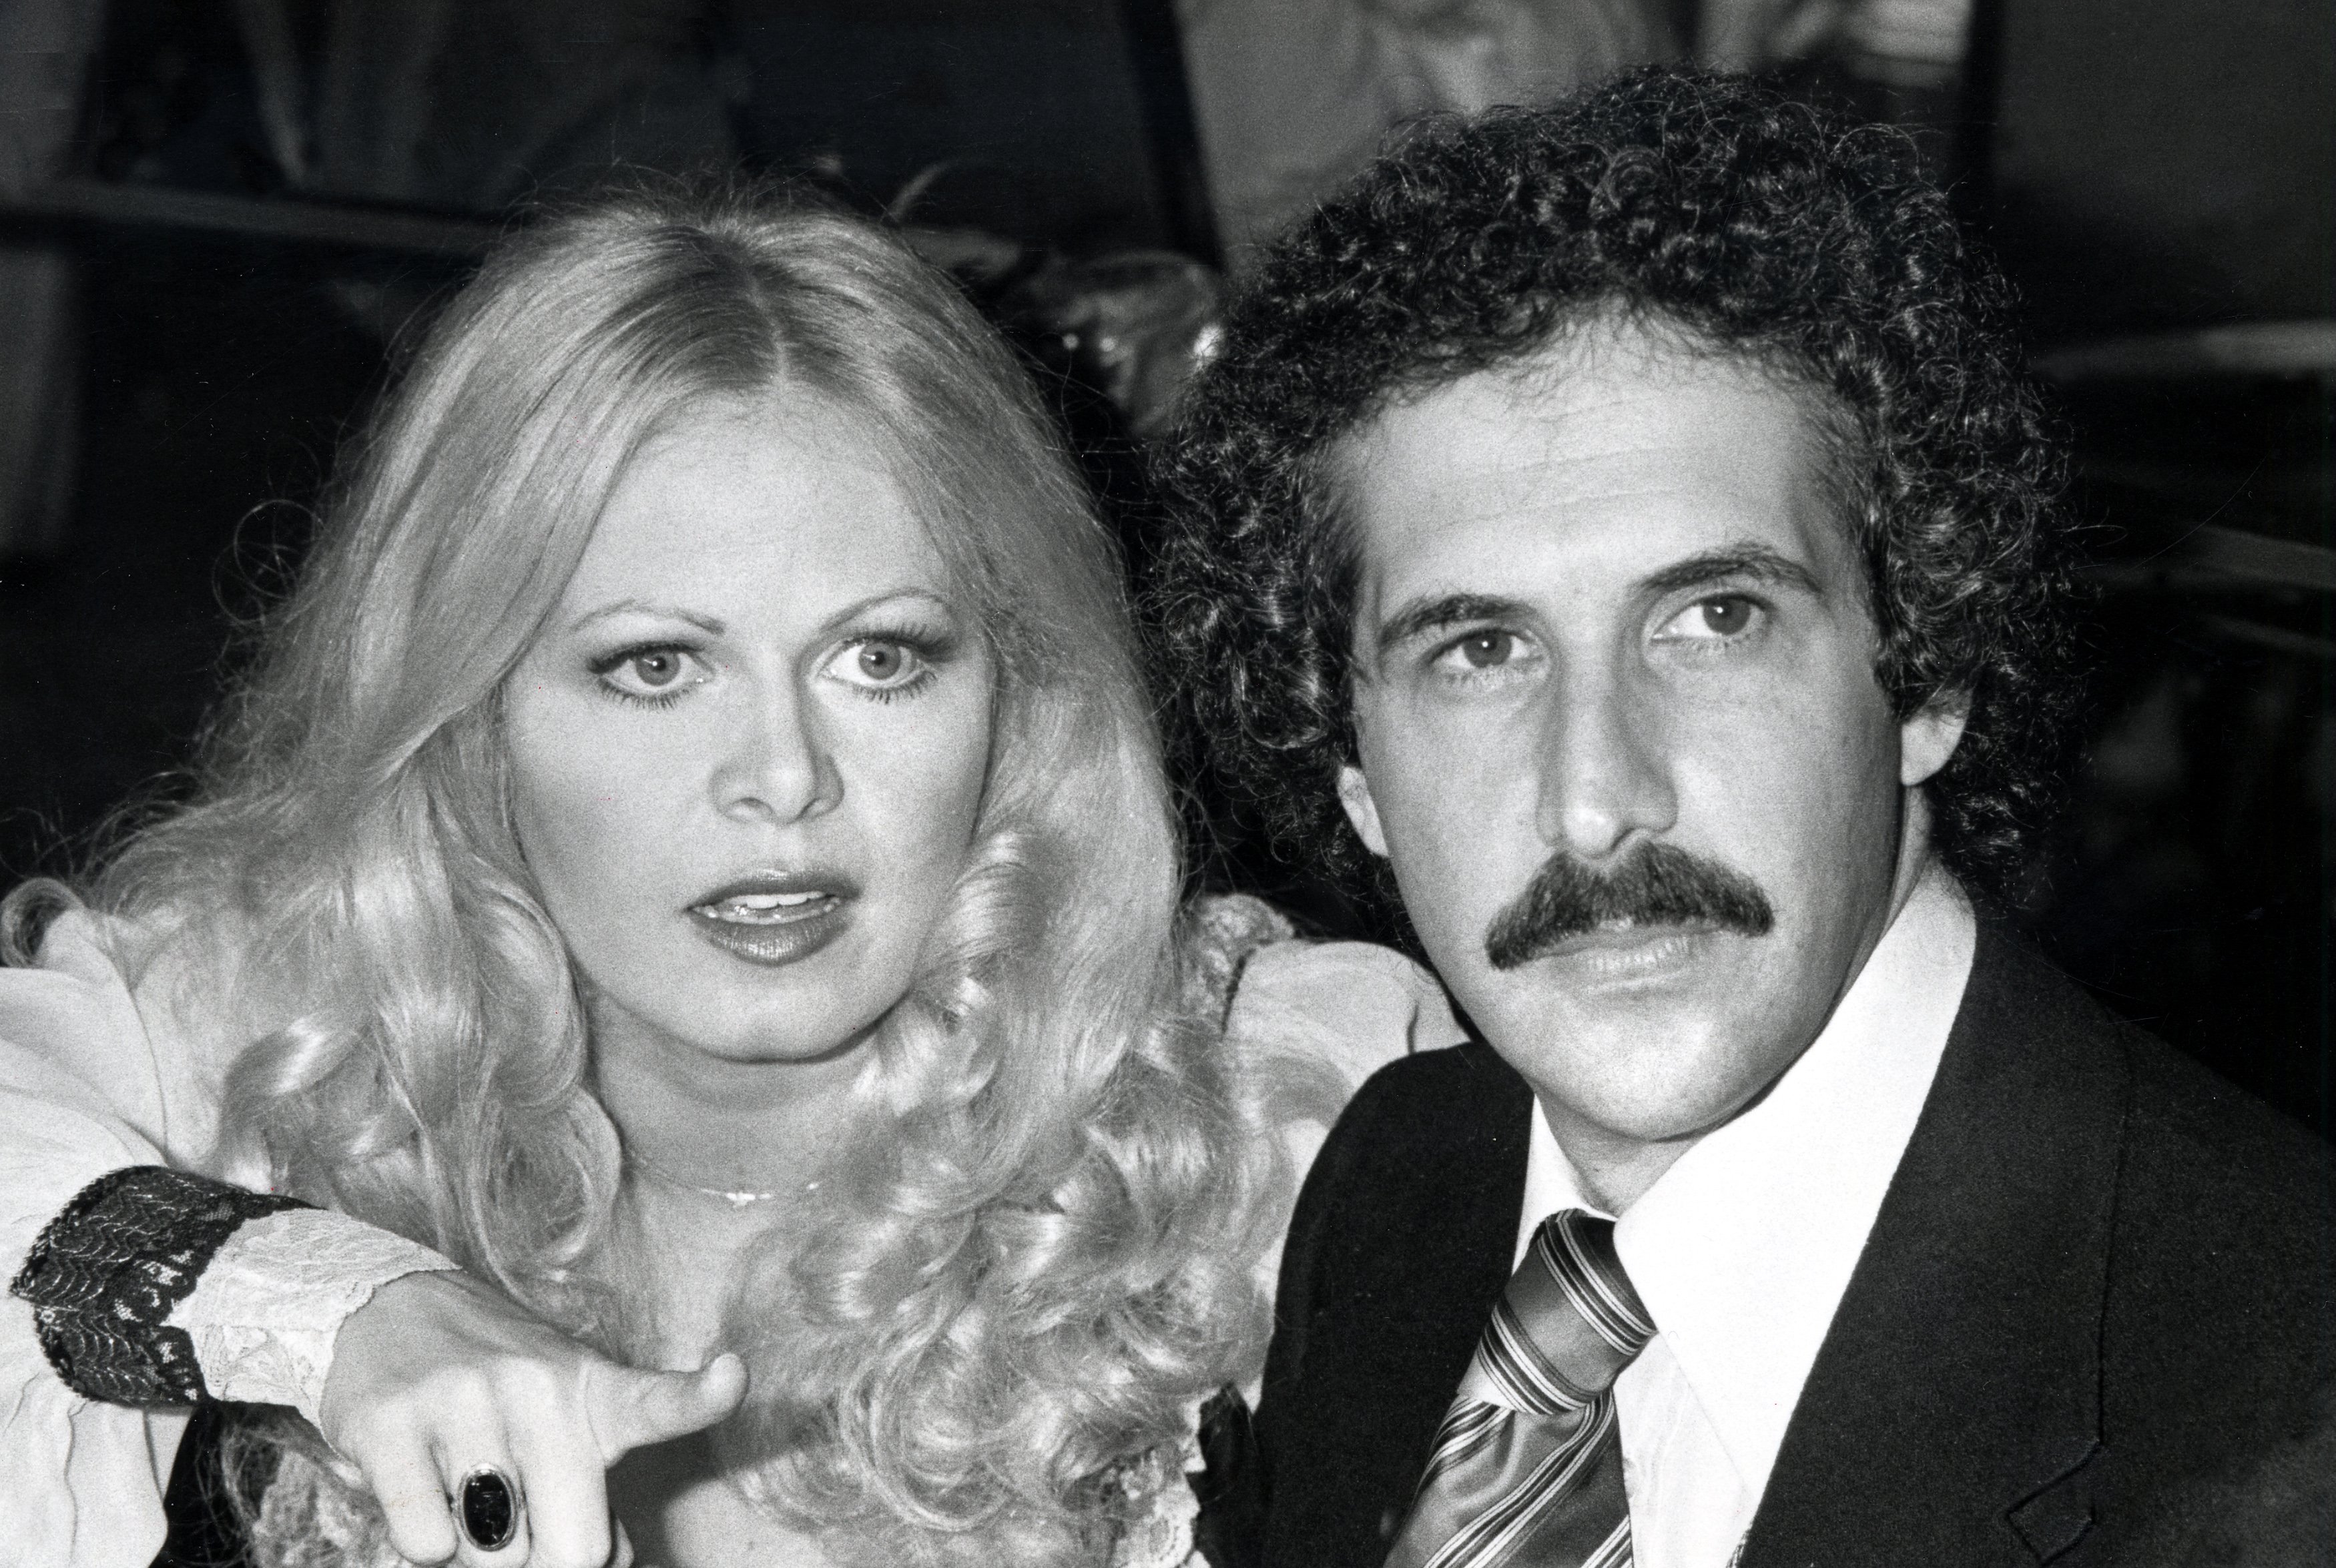 Sally Struthers and Husband William Rader during Iris Awards Banquet at Bonaventure Hotel in Los Angeles, California, United States on March 4, 1978. | Source: Getty Images